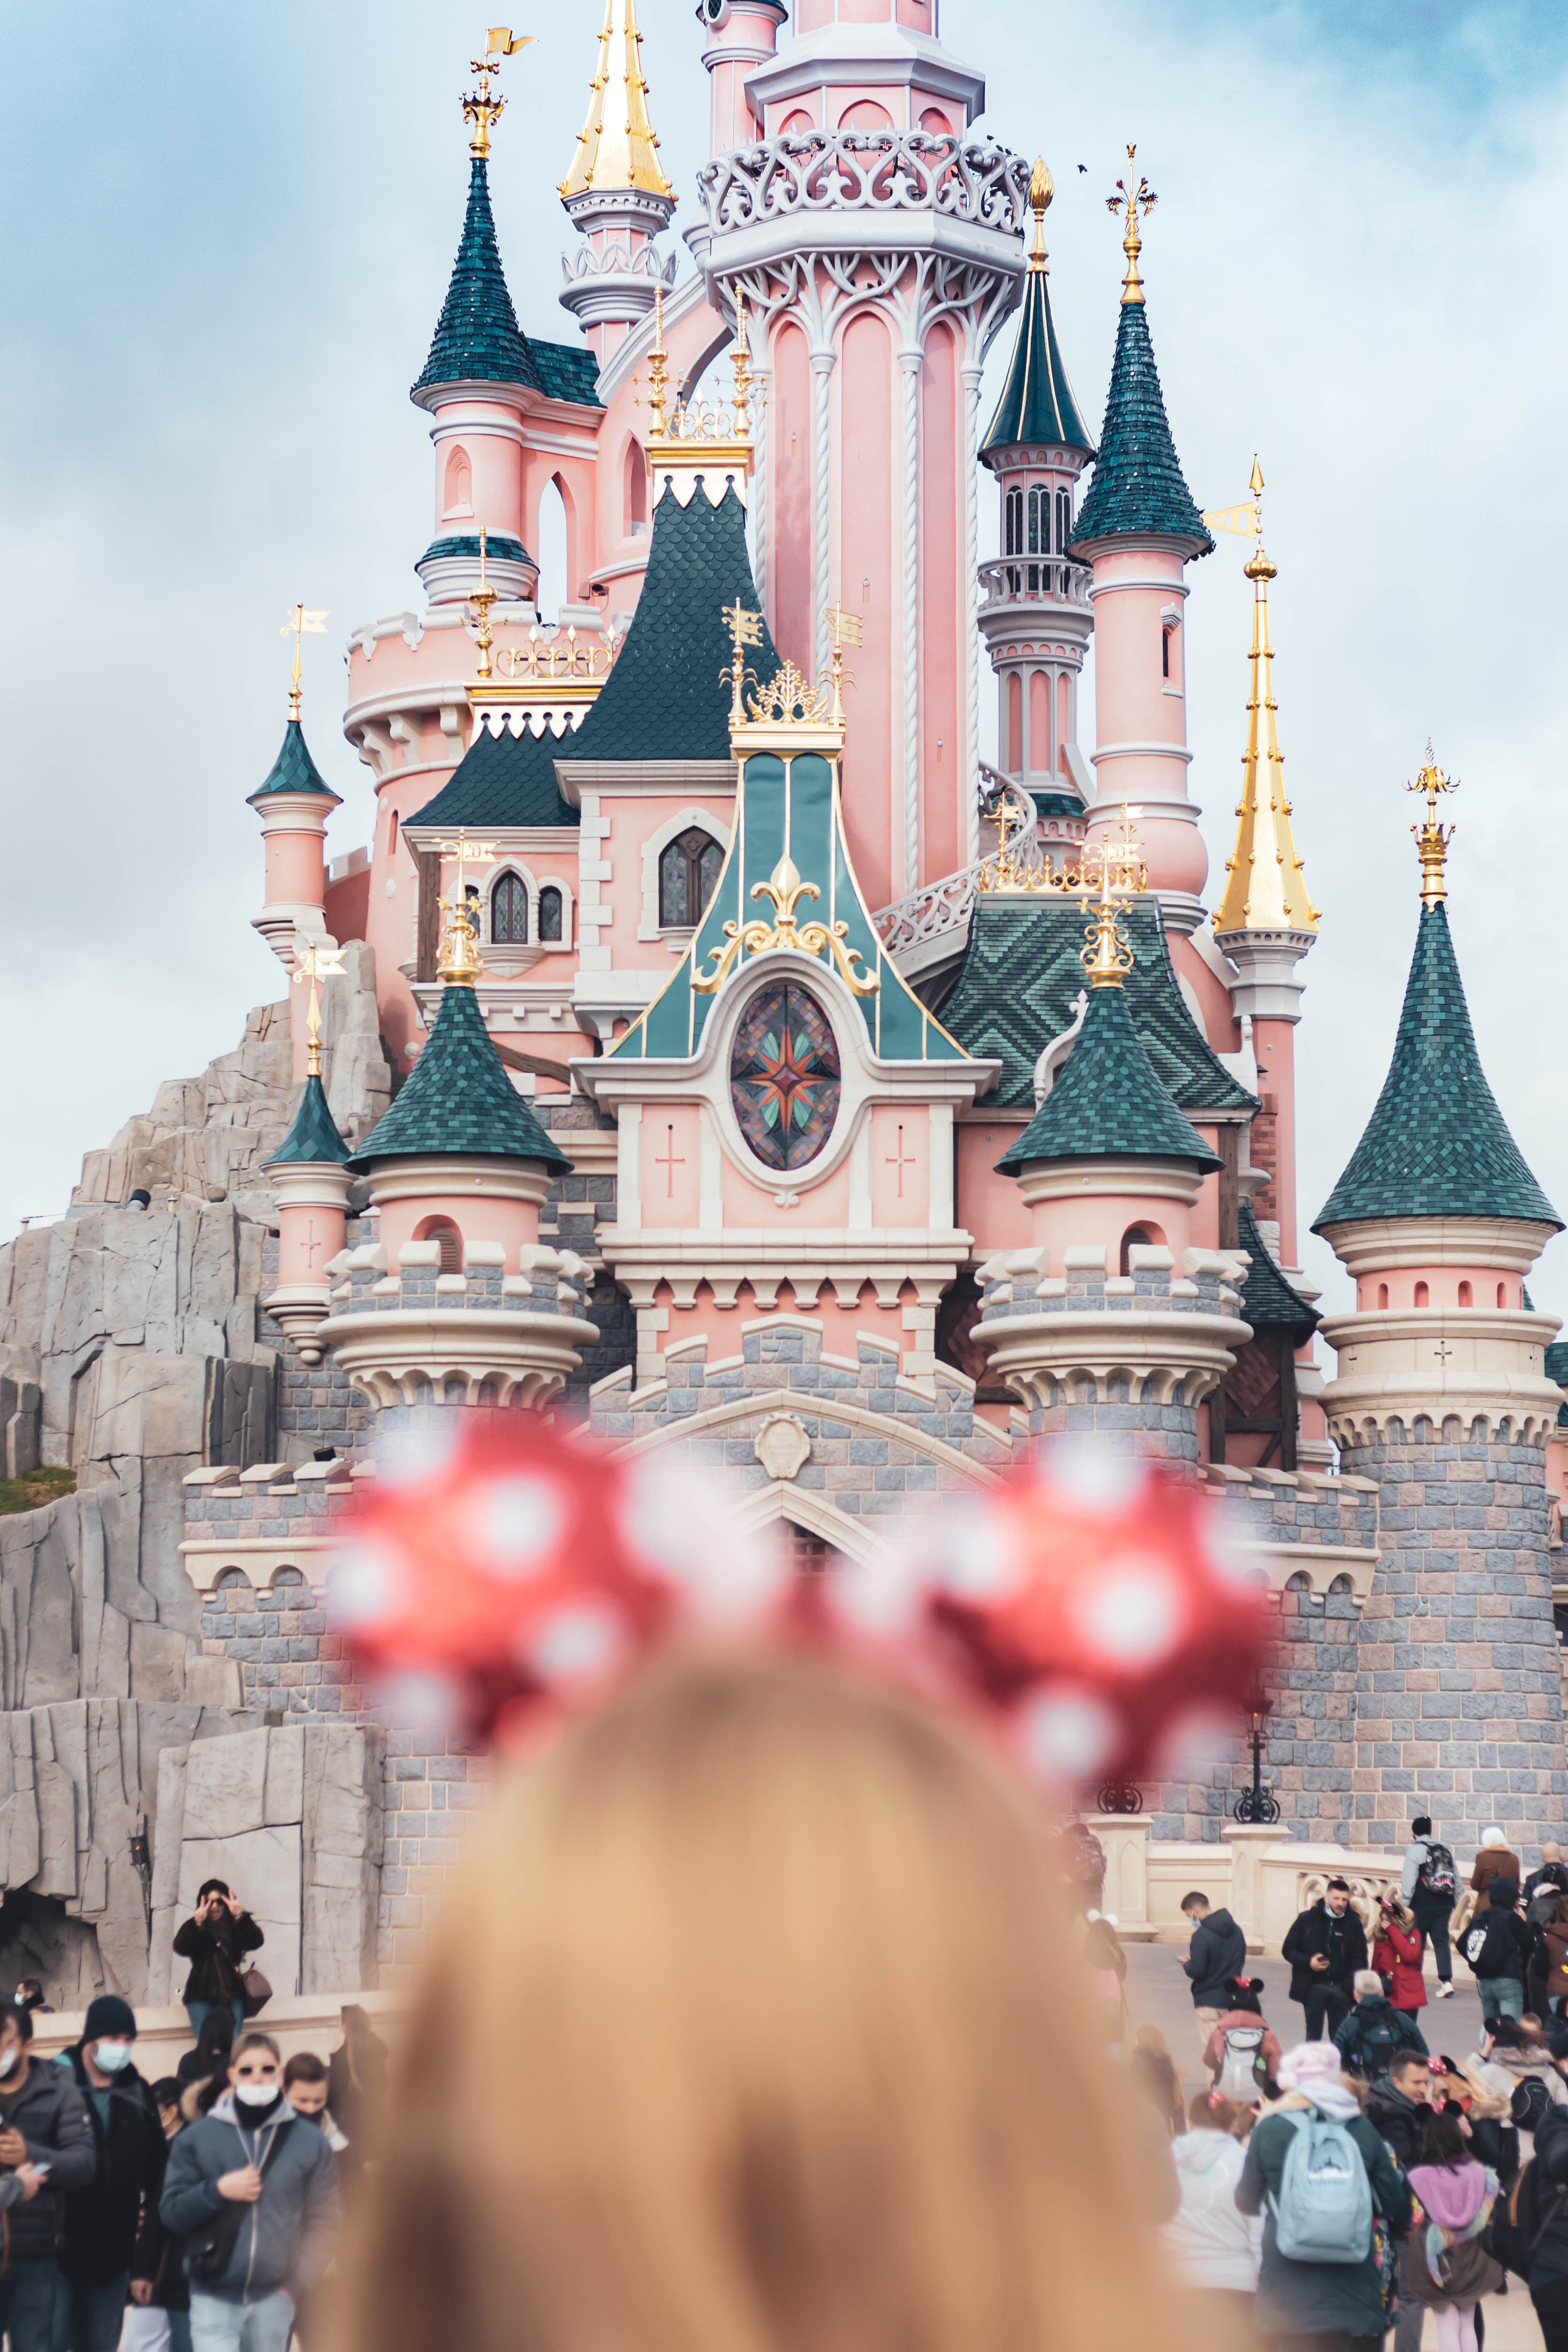 A woman with a Minnie Mouse ear headband in front of a pink castle. - Disneyland